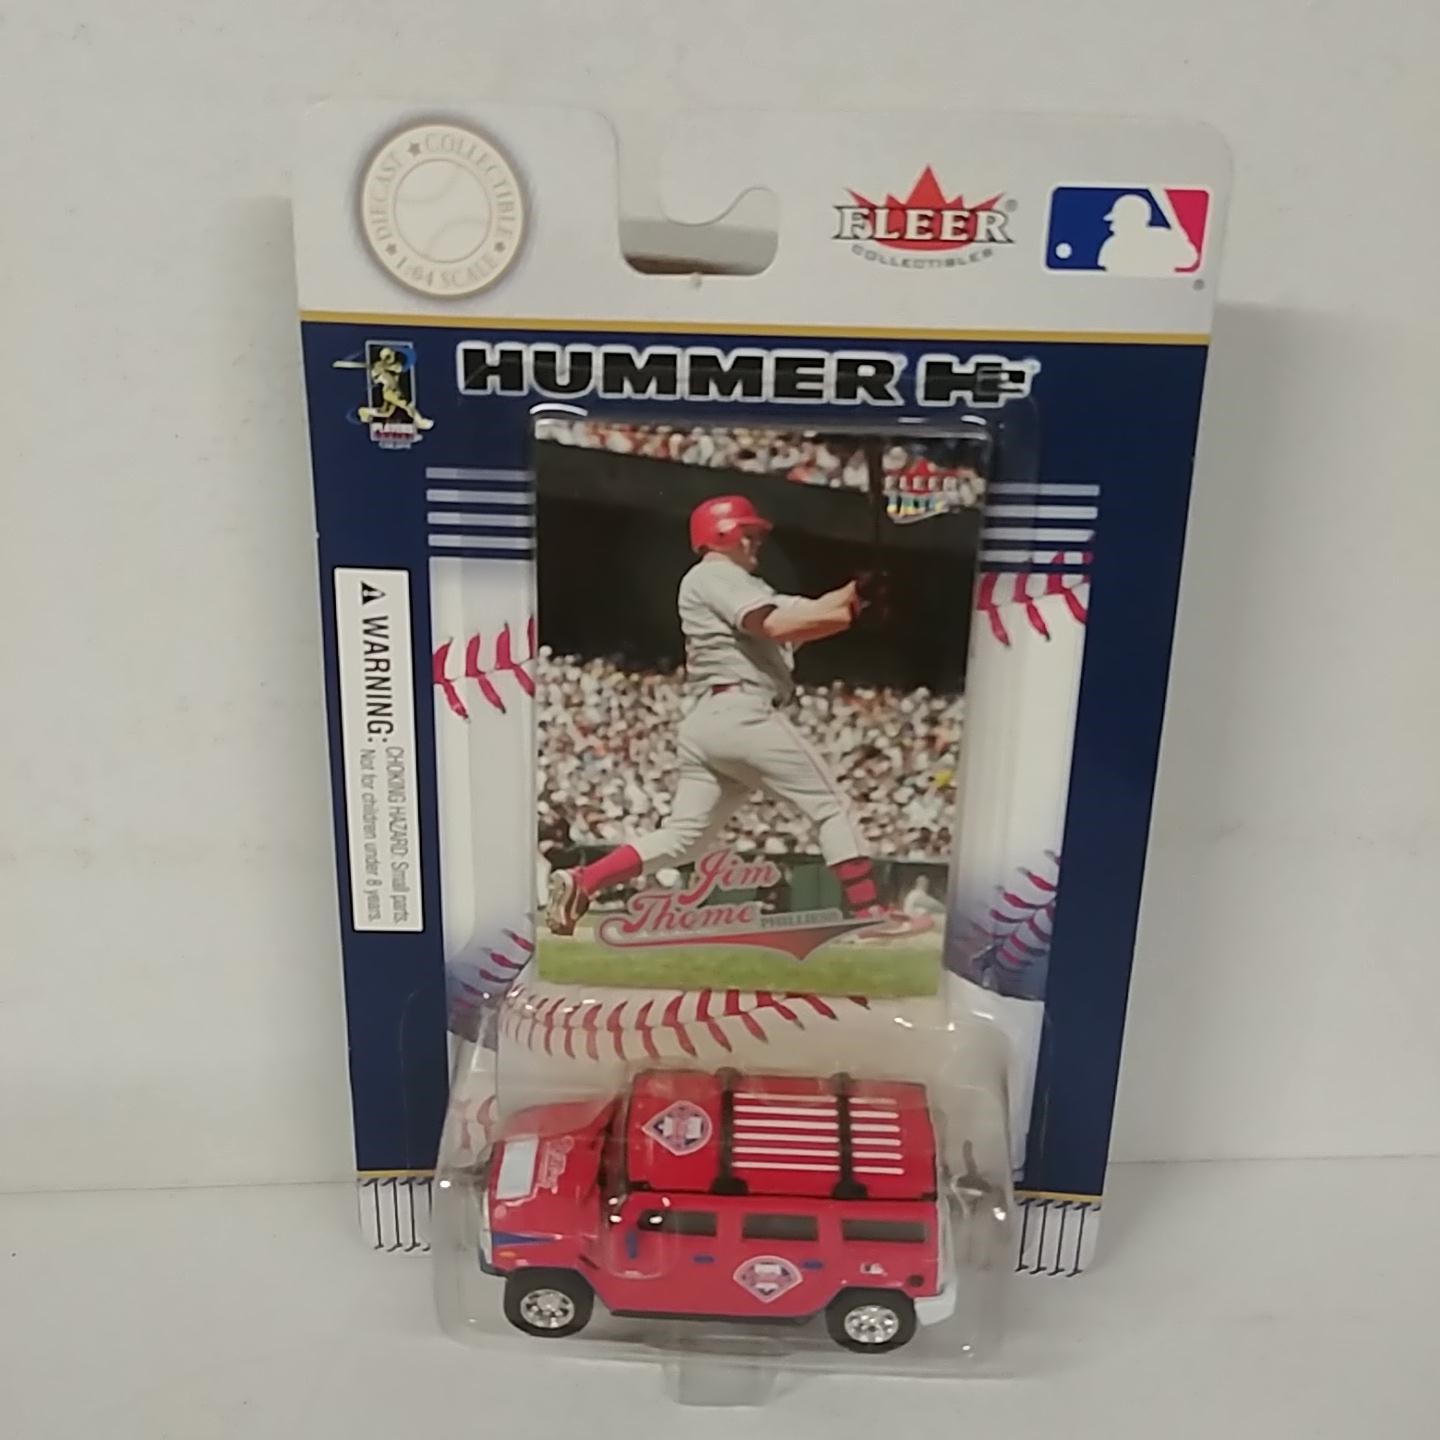 2004 Philadelphia Phillies 1/64th Hummer with Jim Thome trading card